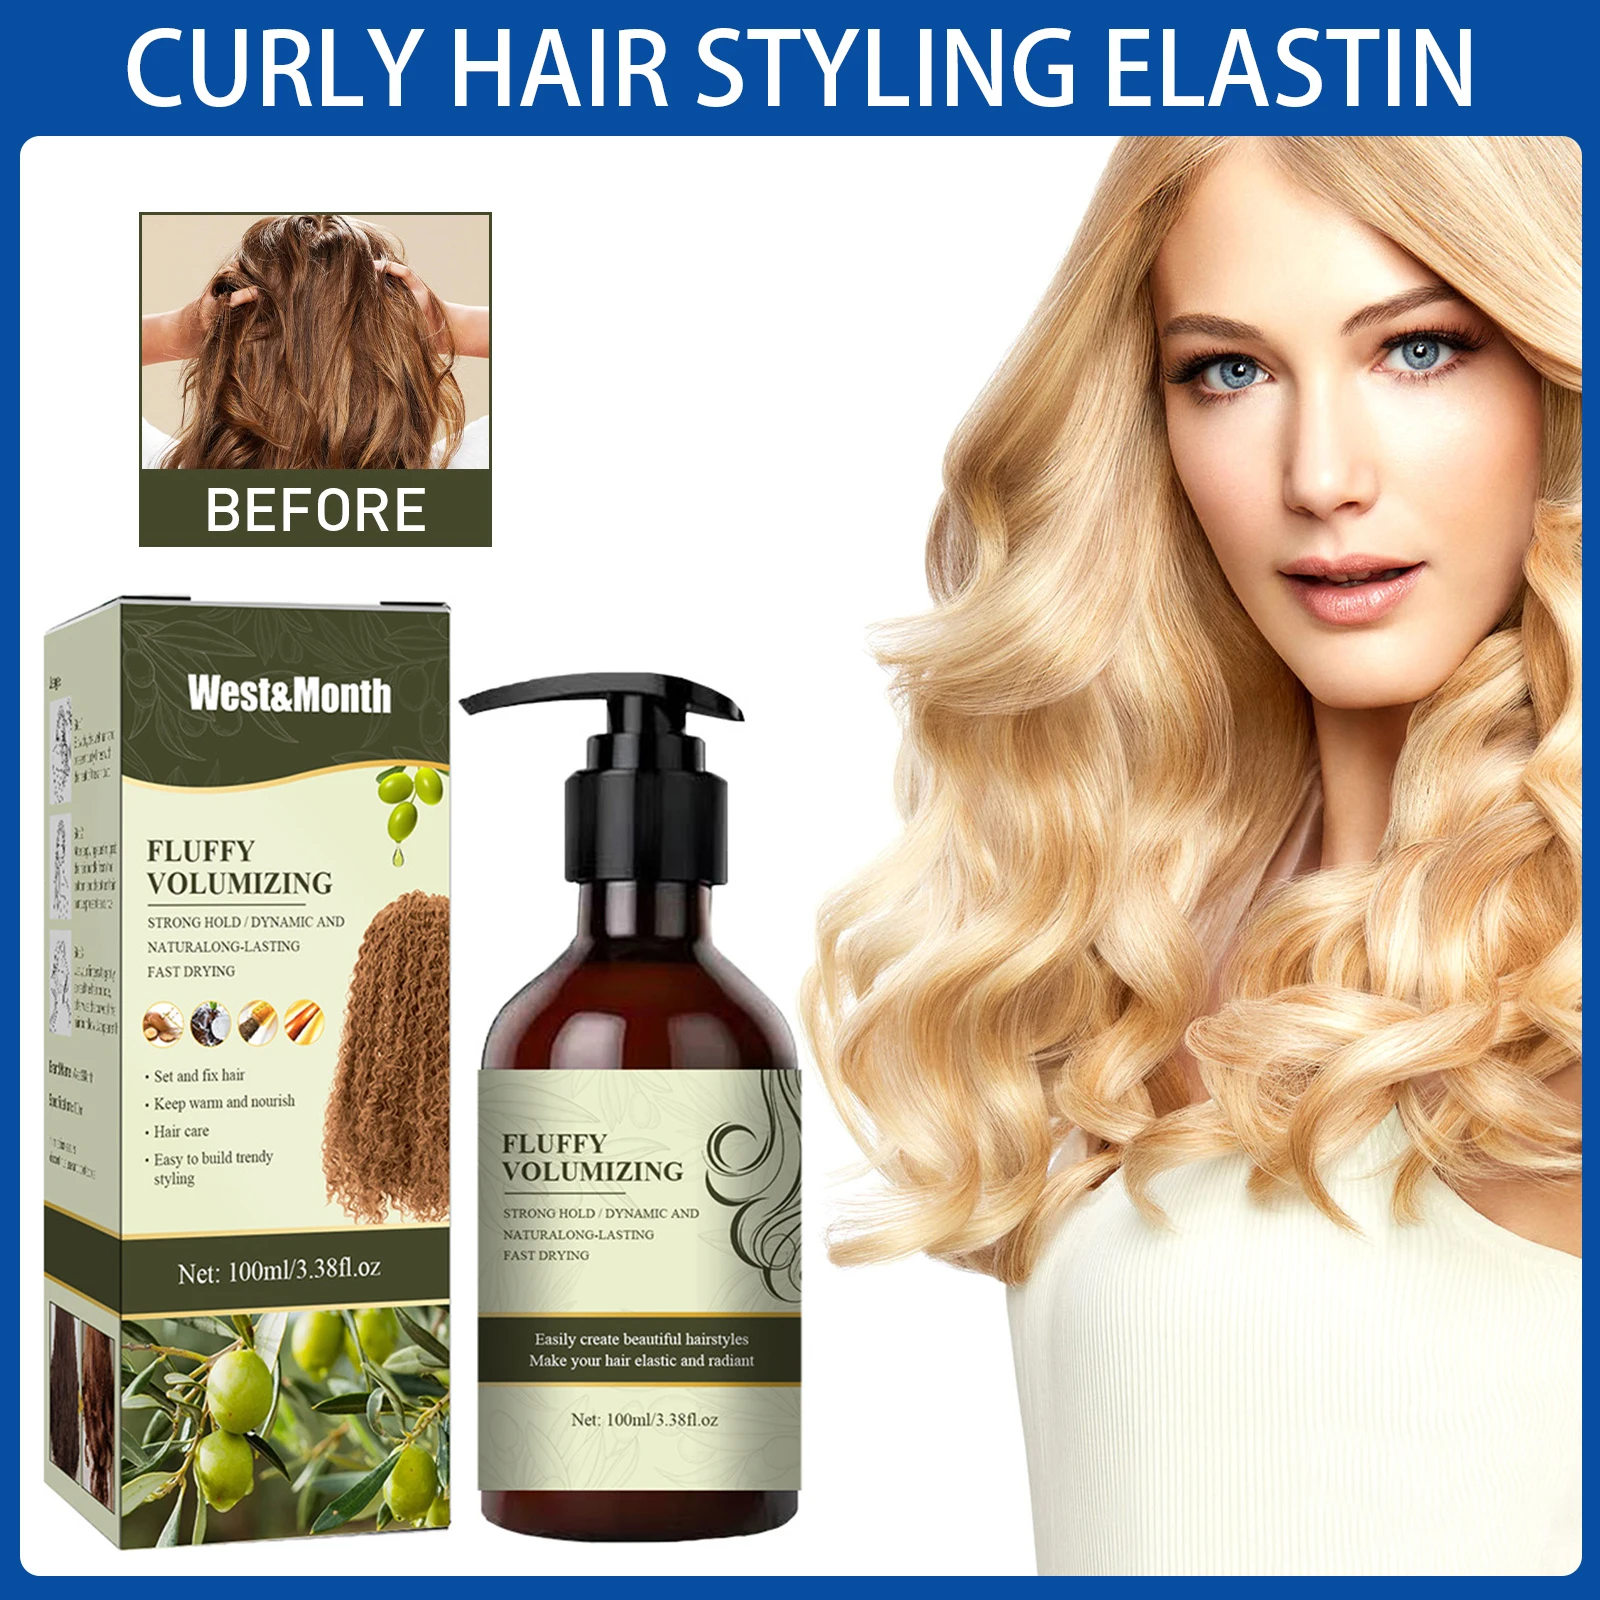 100ml Curly Elastin Volume Styling Moisturizing Anti-Frizz Repairing Olive Oil Styling Gel Cream for Curly Wavy Hair Products